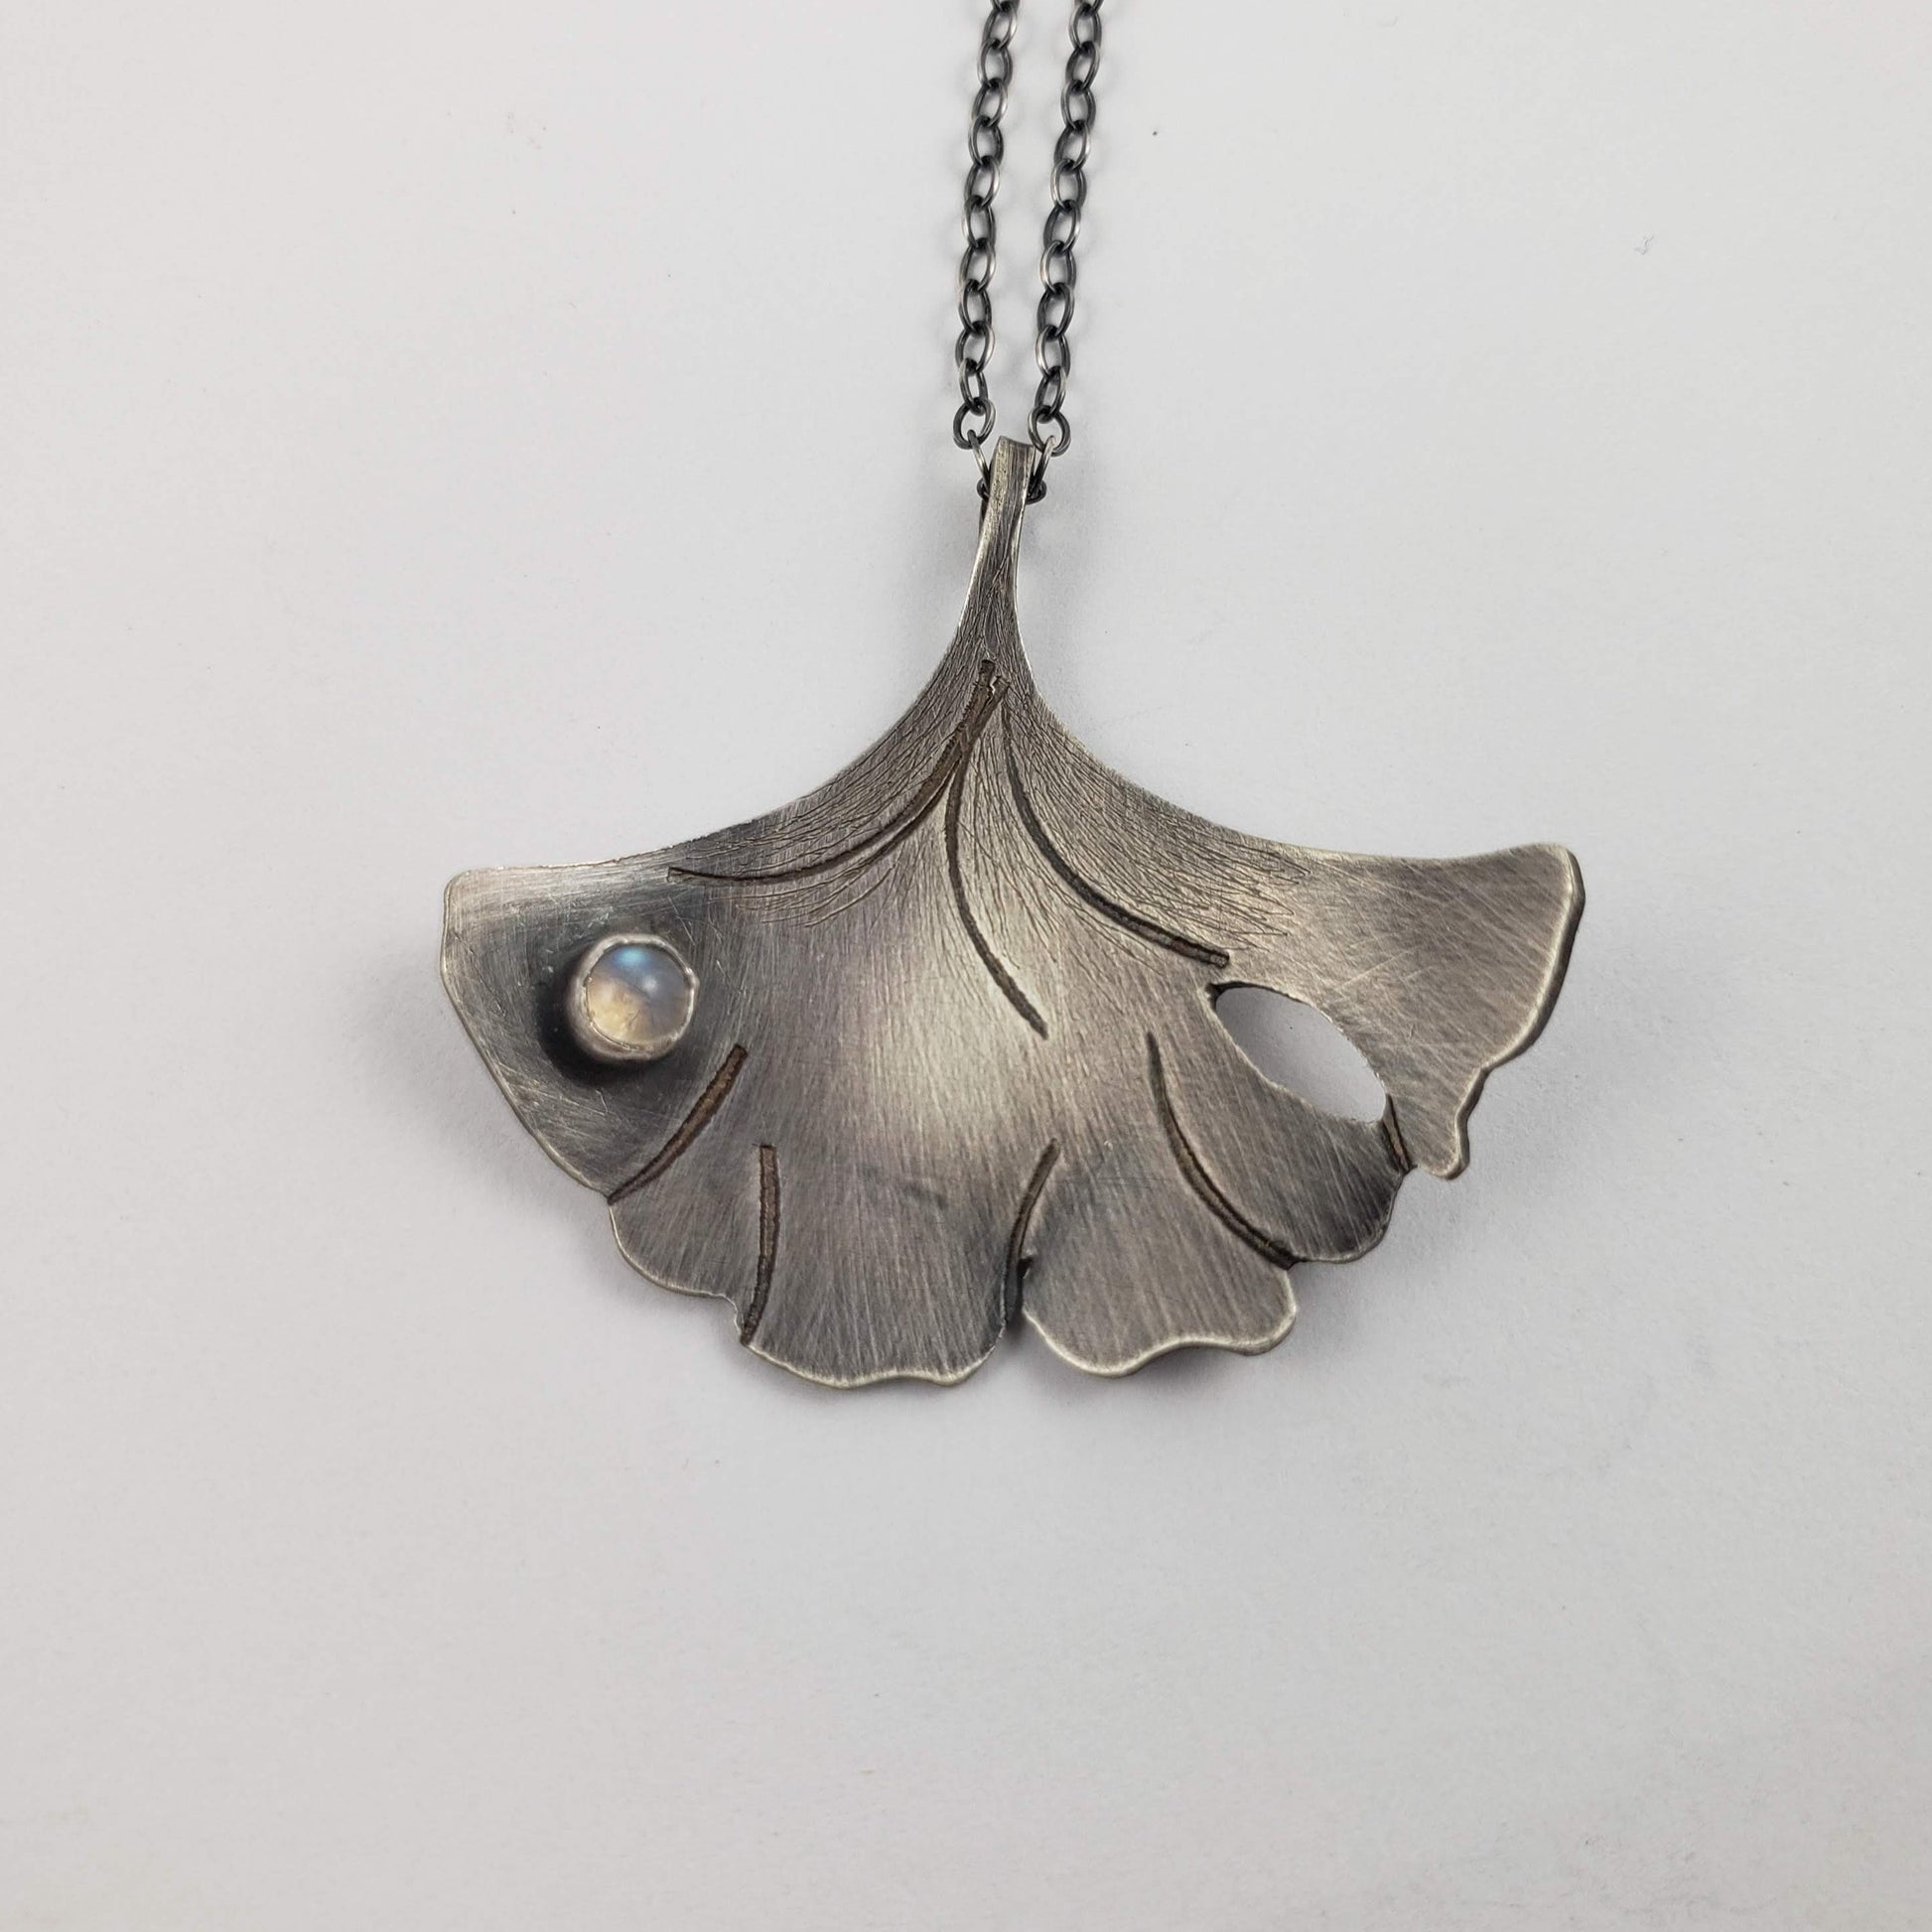 Gingko Leaf Necklace with Moonstone in Sterling Silver